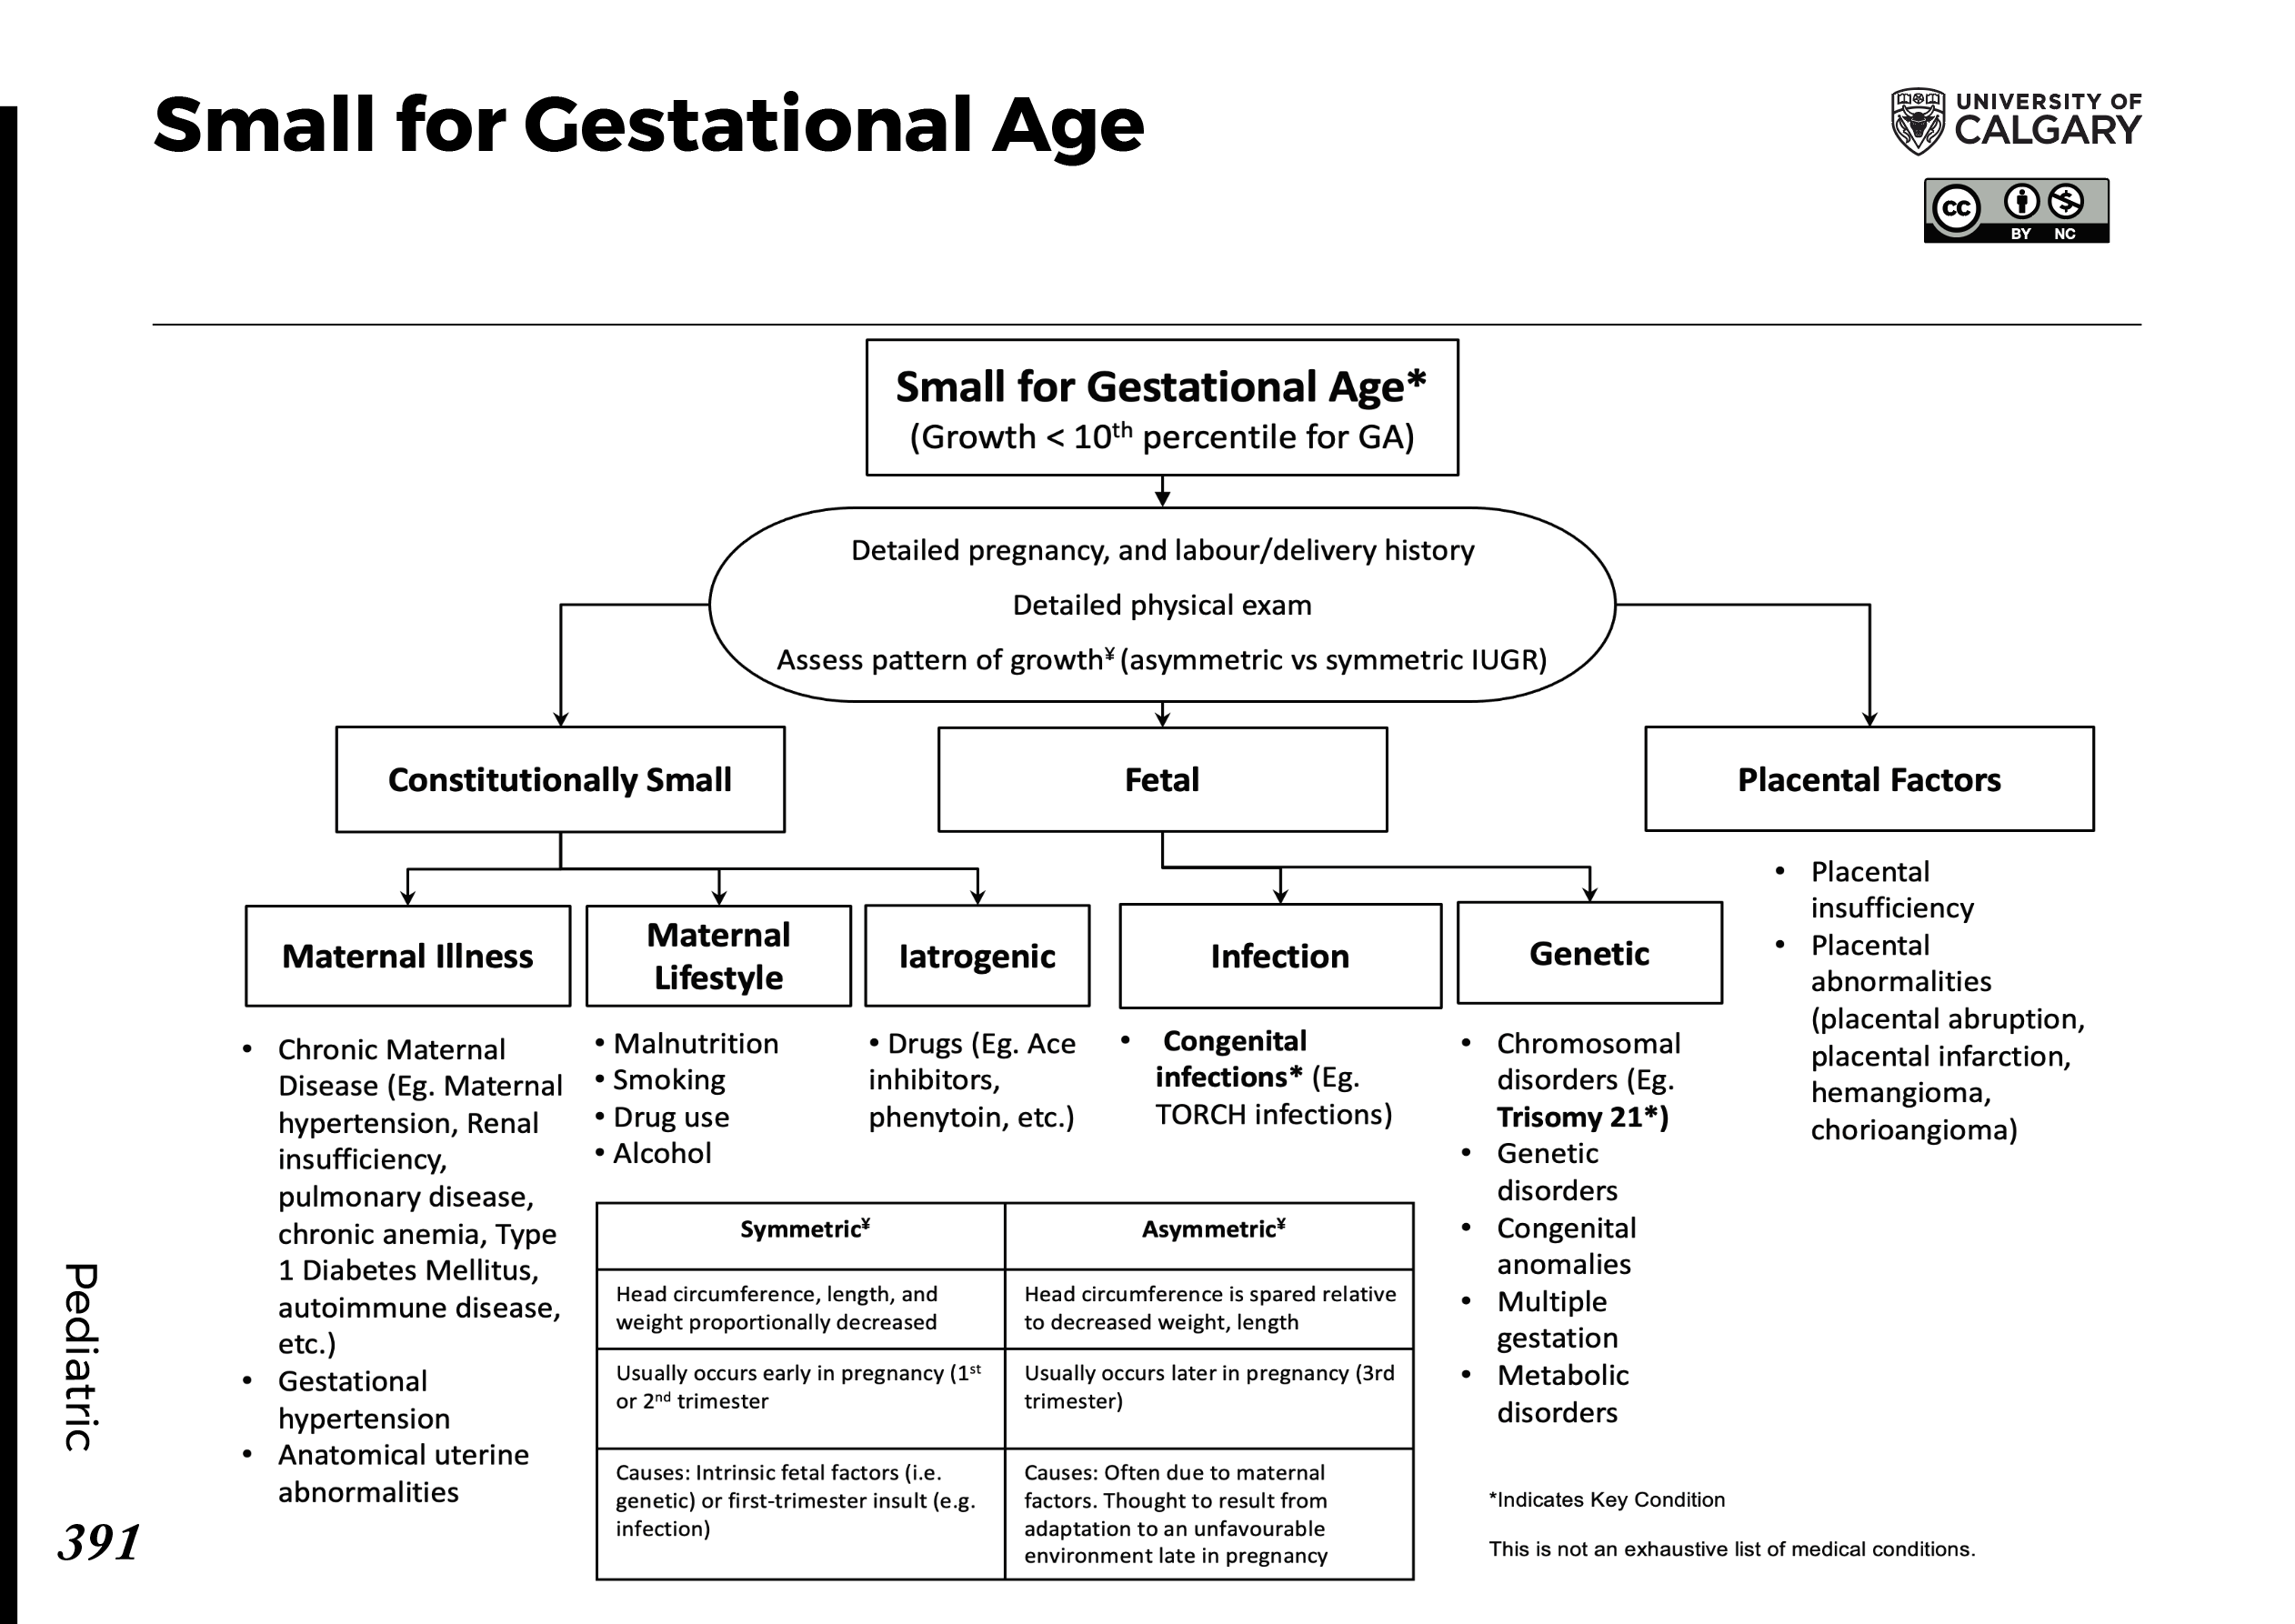 SMALL FOR GESTATIONAL AGE Scheme